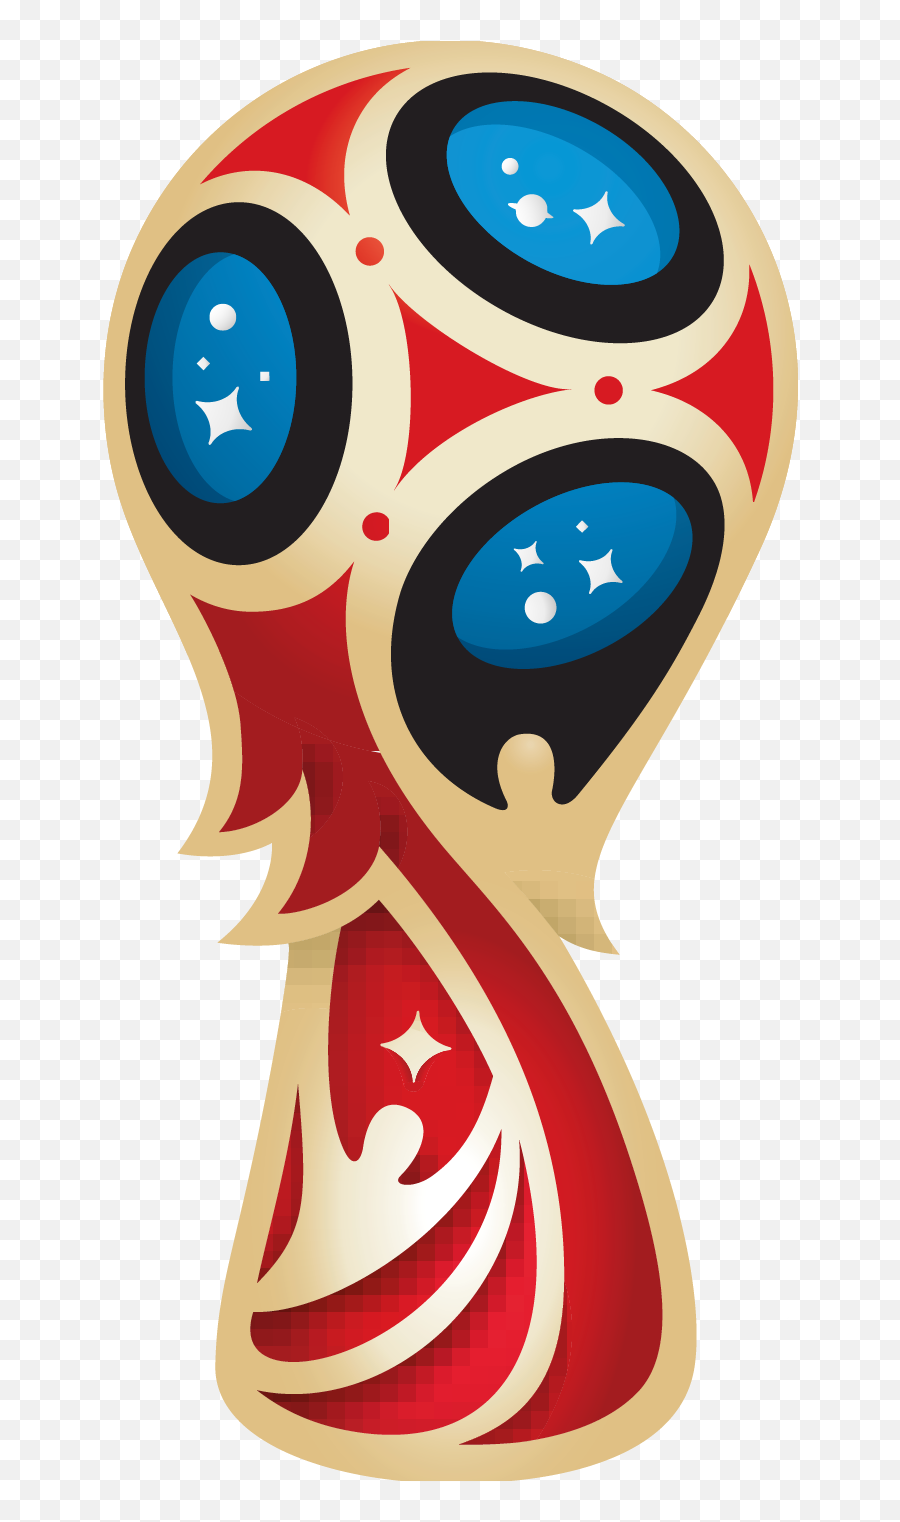 World Cup Logo Png Transparent - World Cup 2018 Logo,World Cup 2018 Png